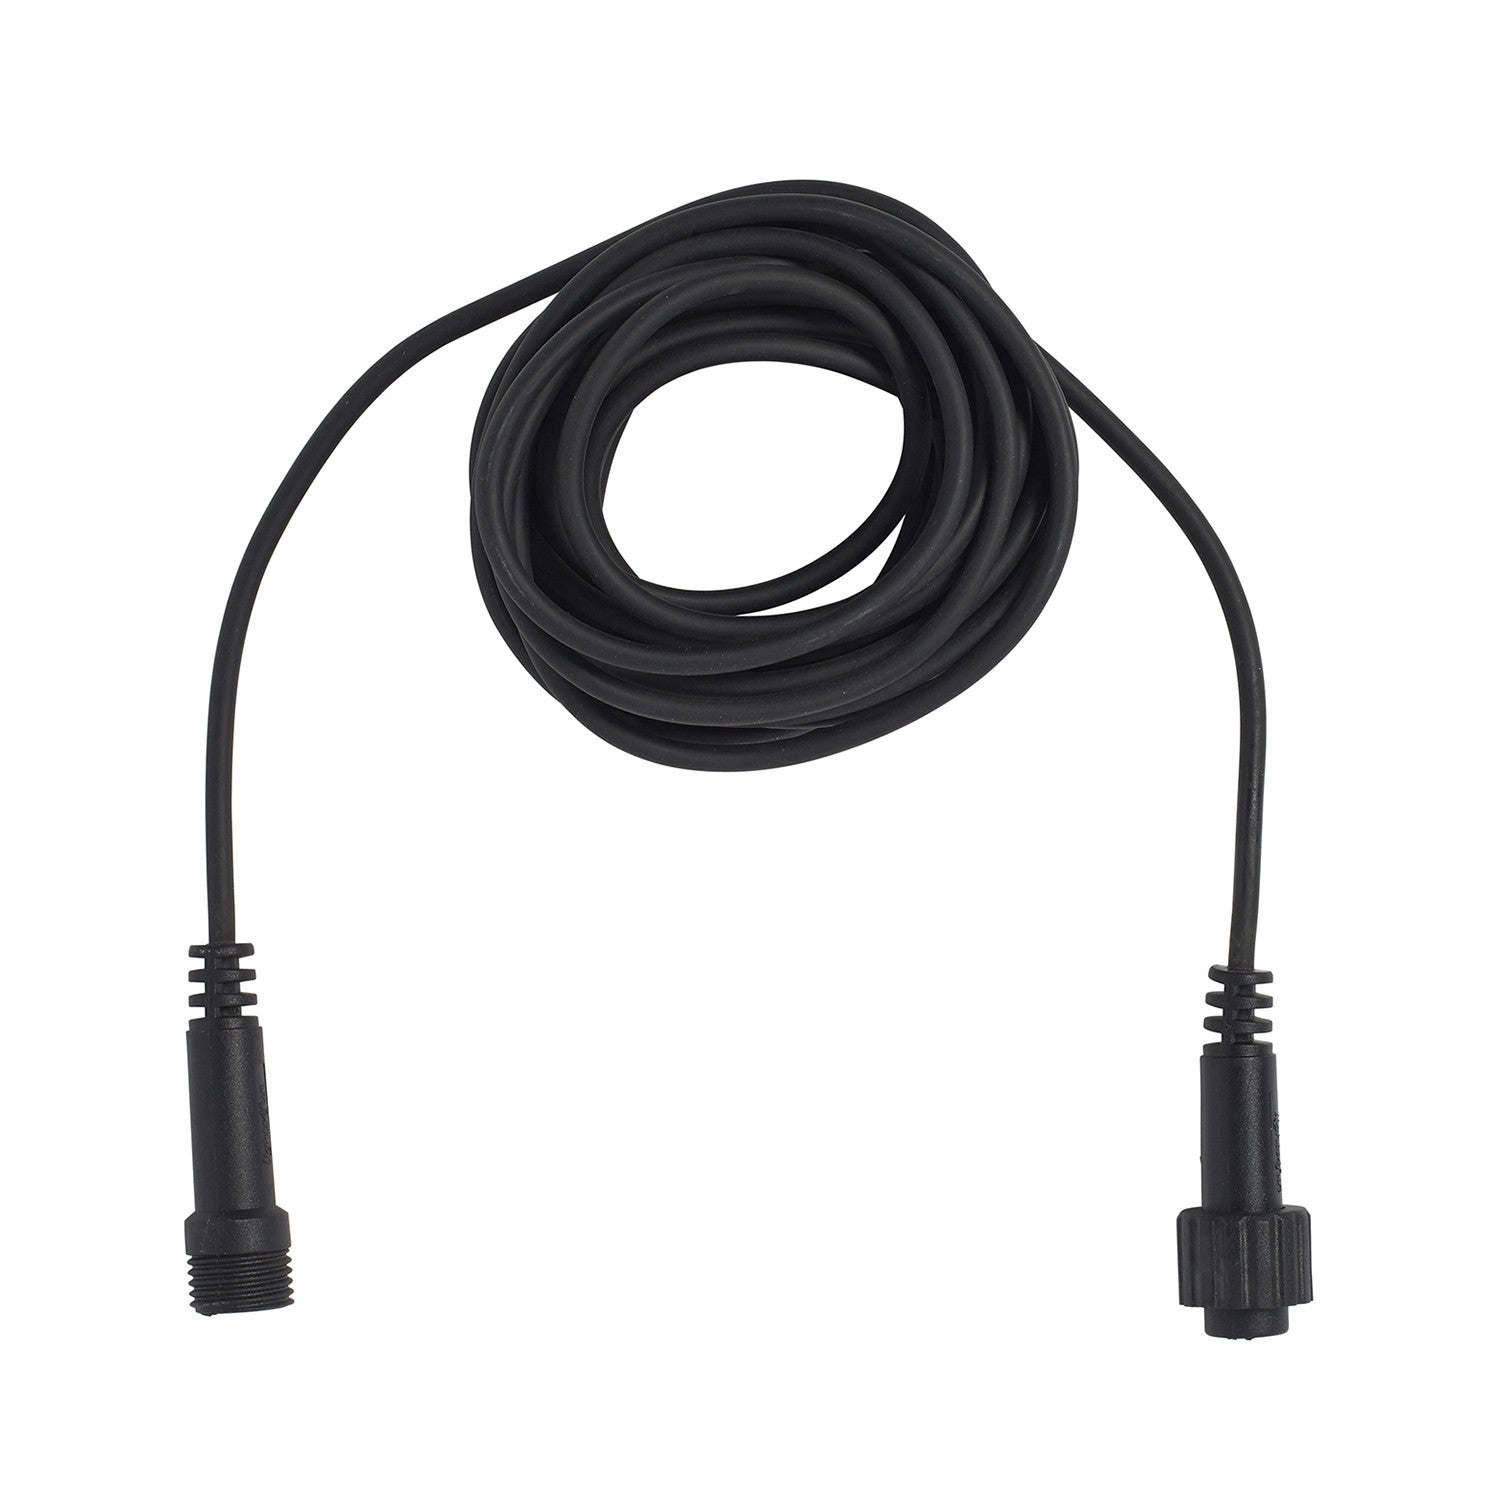 5 Meter H07rn-F 3G 1.5mm2 VDE Rubber Cable with Betteri Bc01 Female Stecker One  One End and Schuko Plug on The Other End Black - China Betterie Bc01,  Betteri Bc01 Female